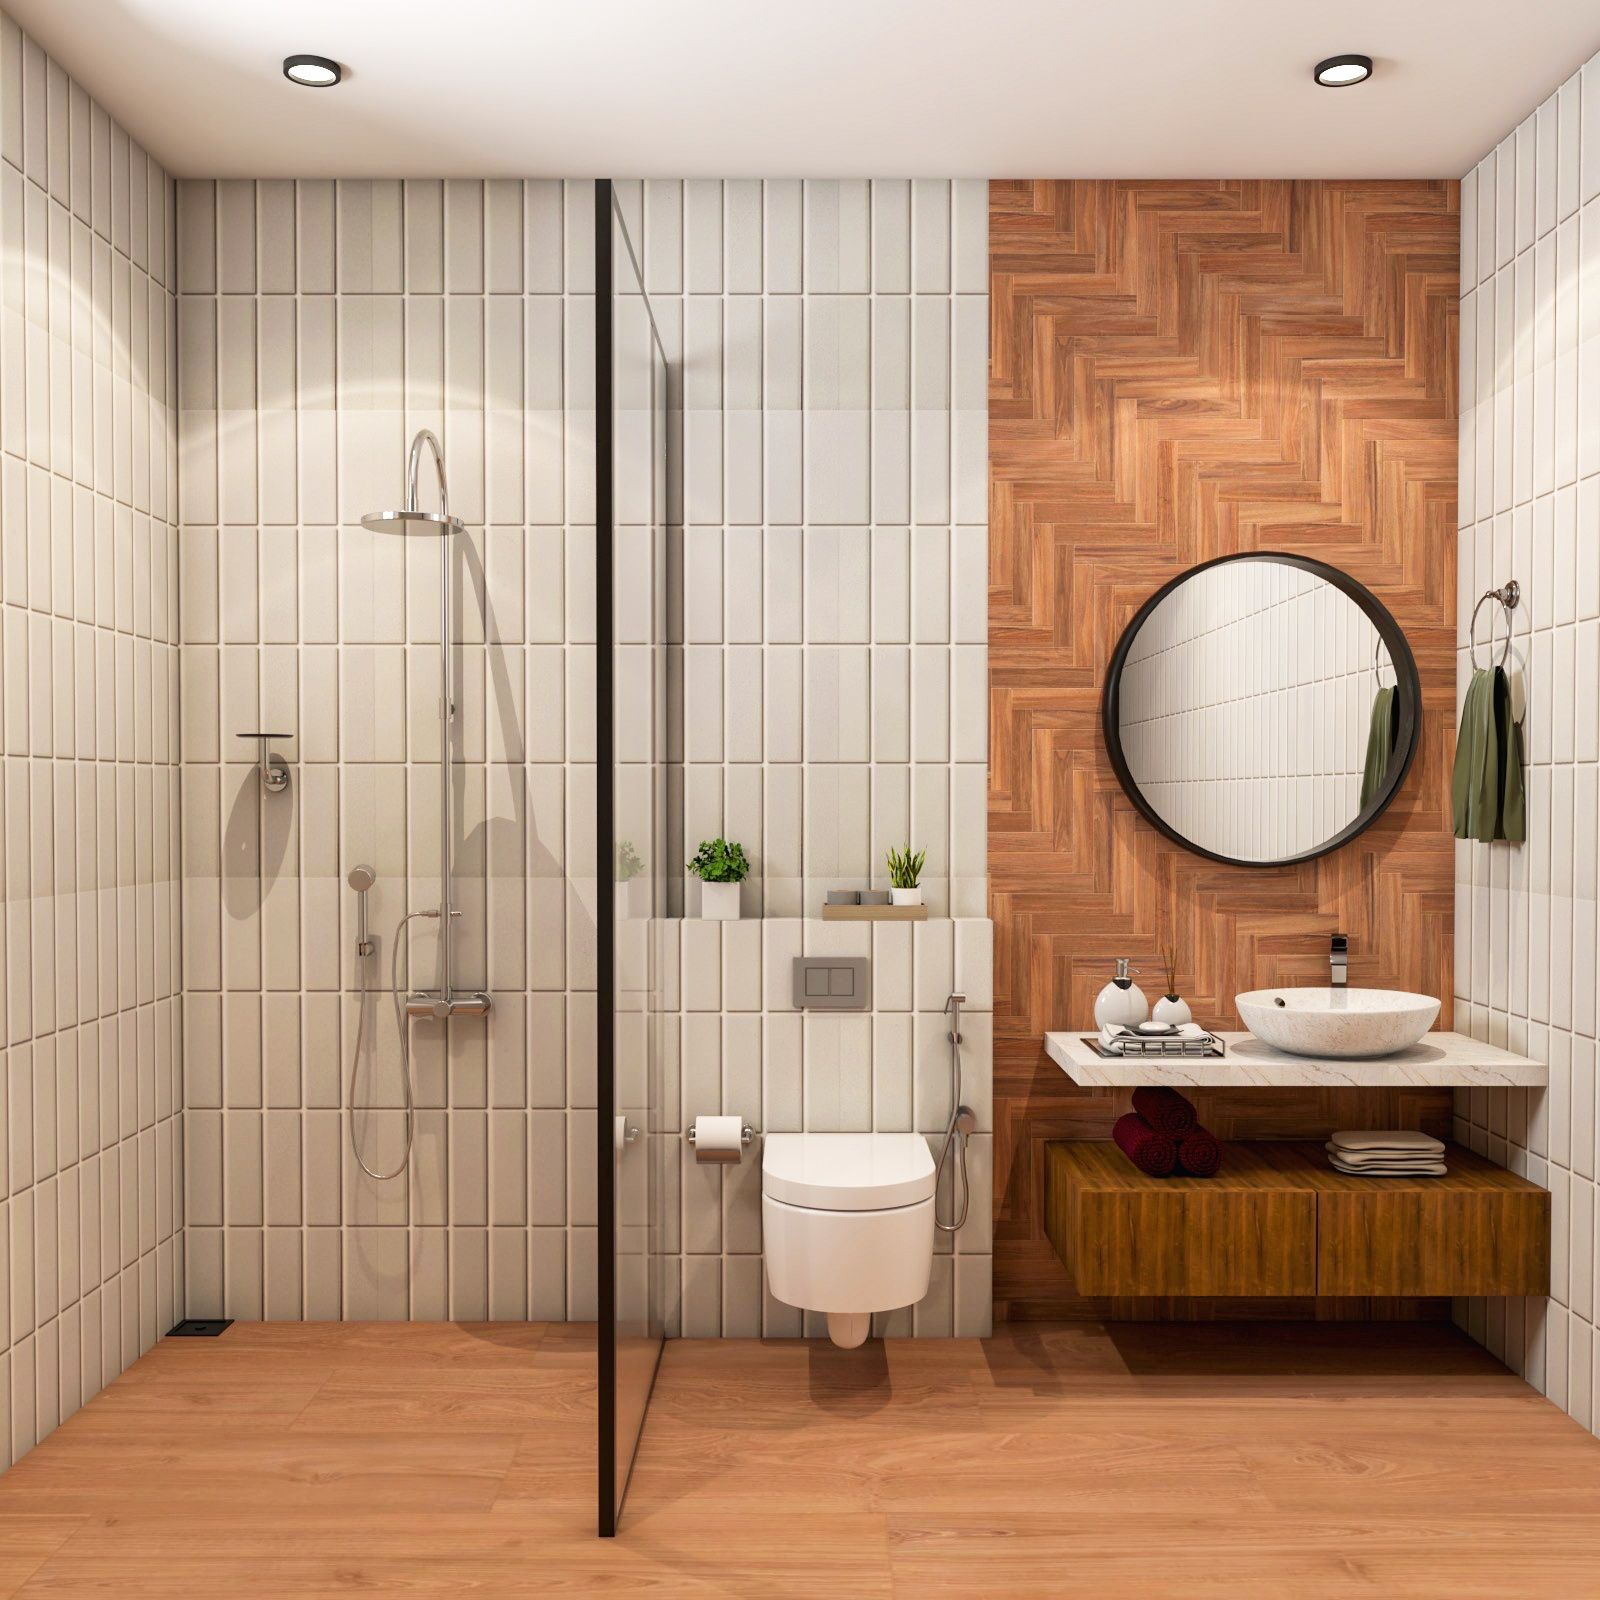 Scandinavian Brown And White Small Bathroom Ideas With Wall-Mounted Wooden Bathroom Cabinet